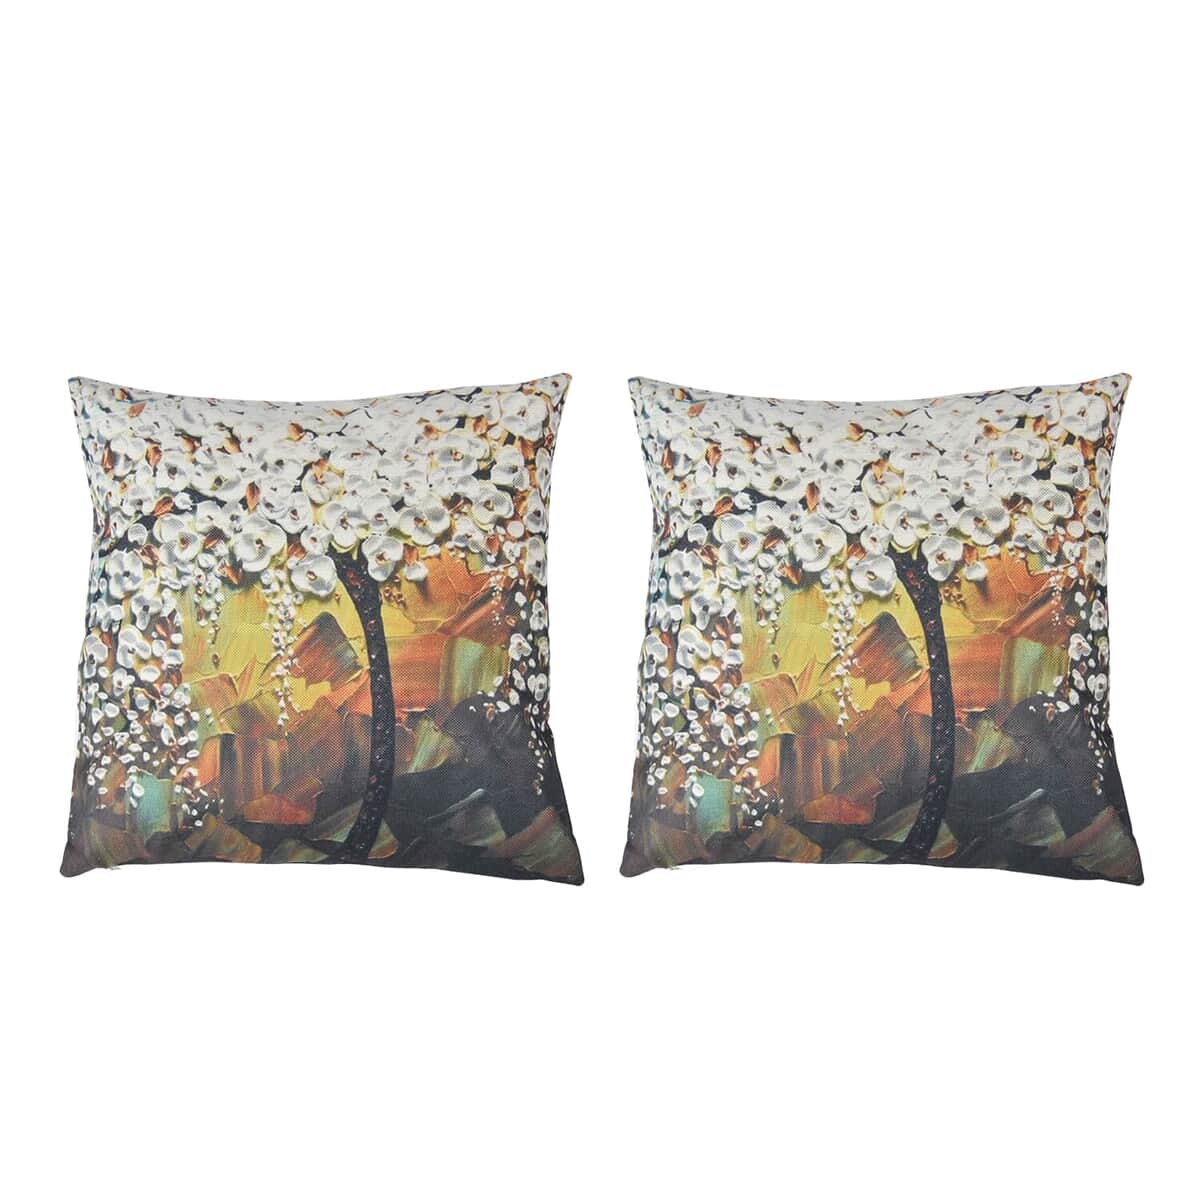 Homesmart White & Yellow Floral Tree Pattern 100% Polyester Cushion Cover Set of 2, Wrinkle Resistant Ultra Soft Cushion Cover Set with Zipper Closure image number 1